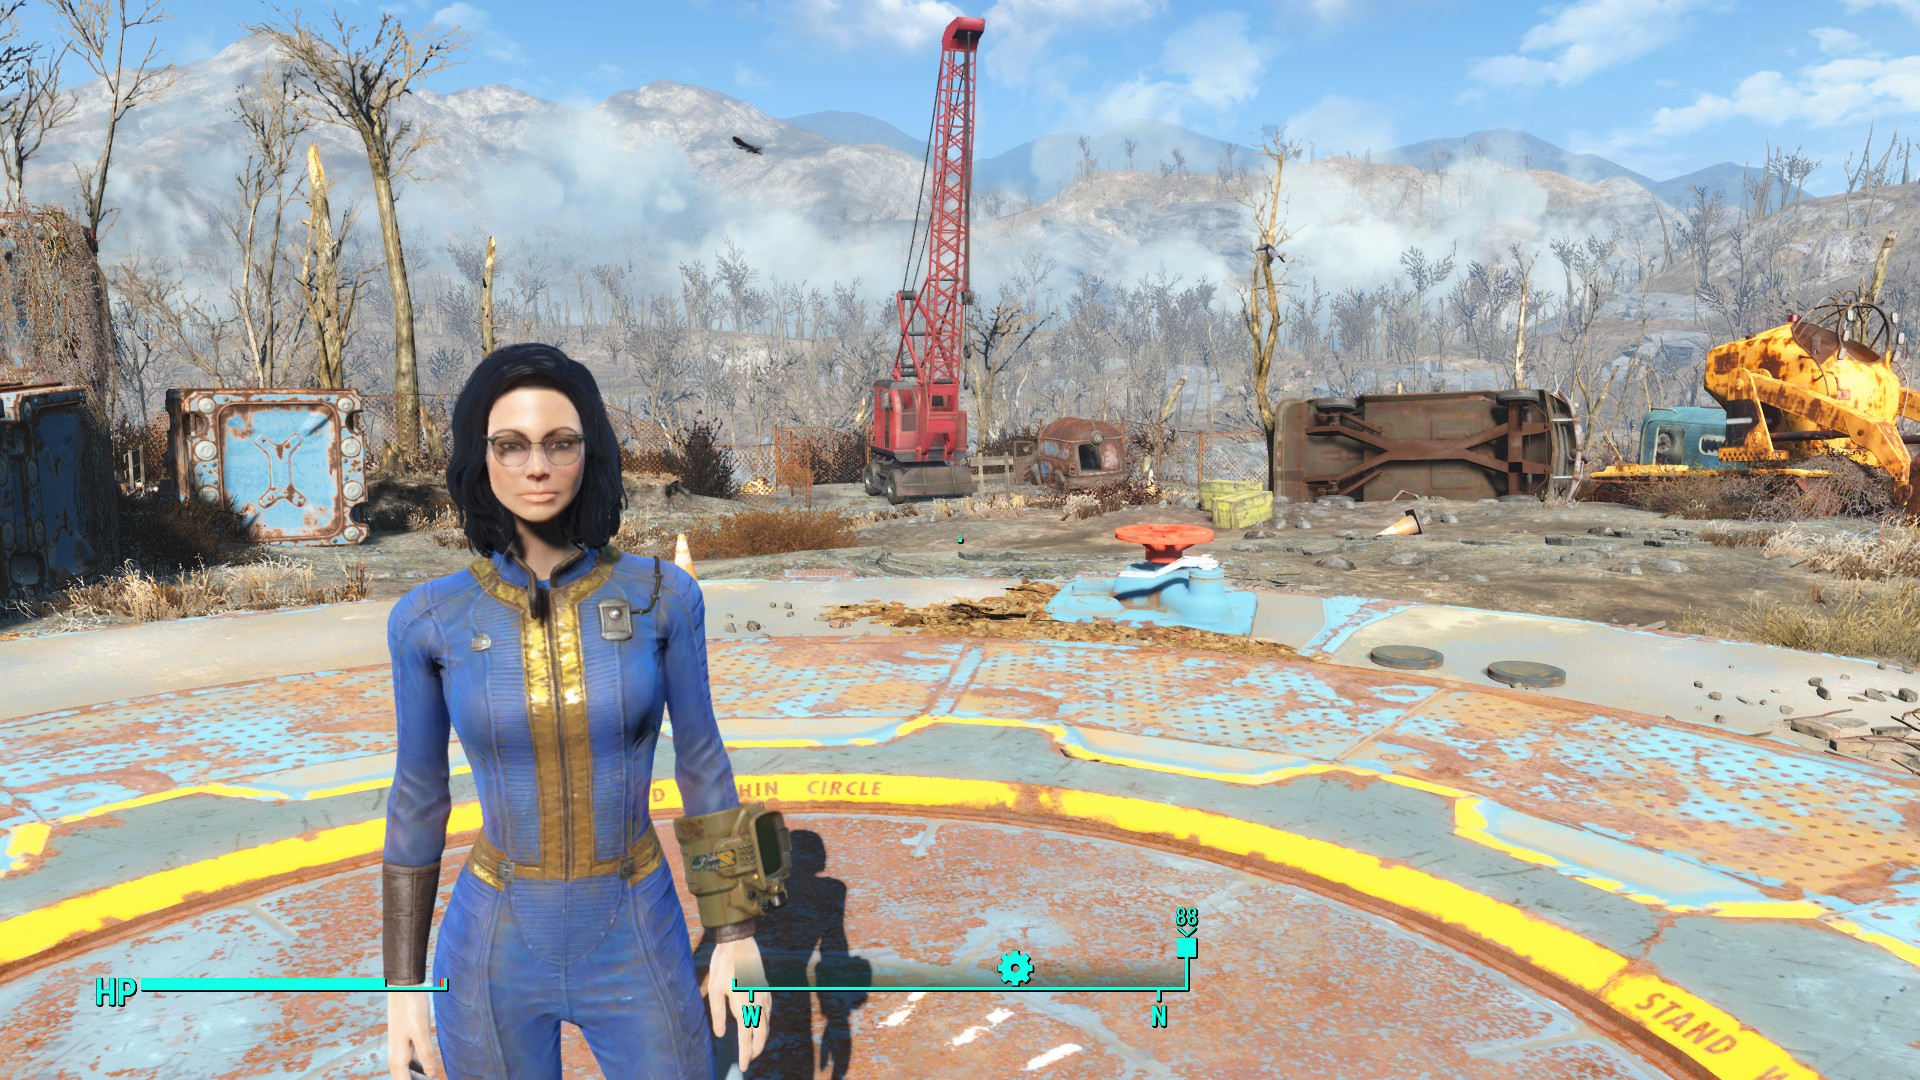 Character Save - Claire by Robert - Fallout 4 / FO4 mods